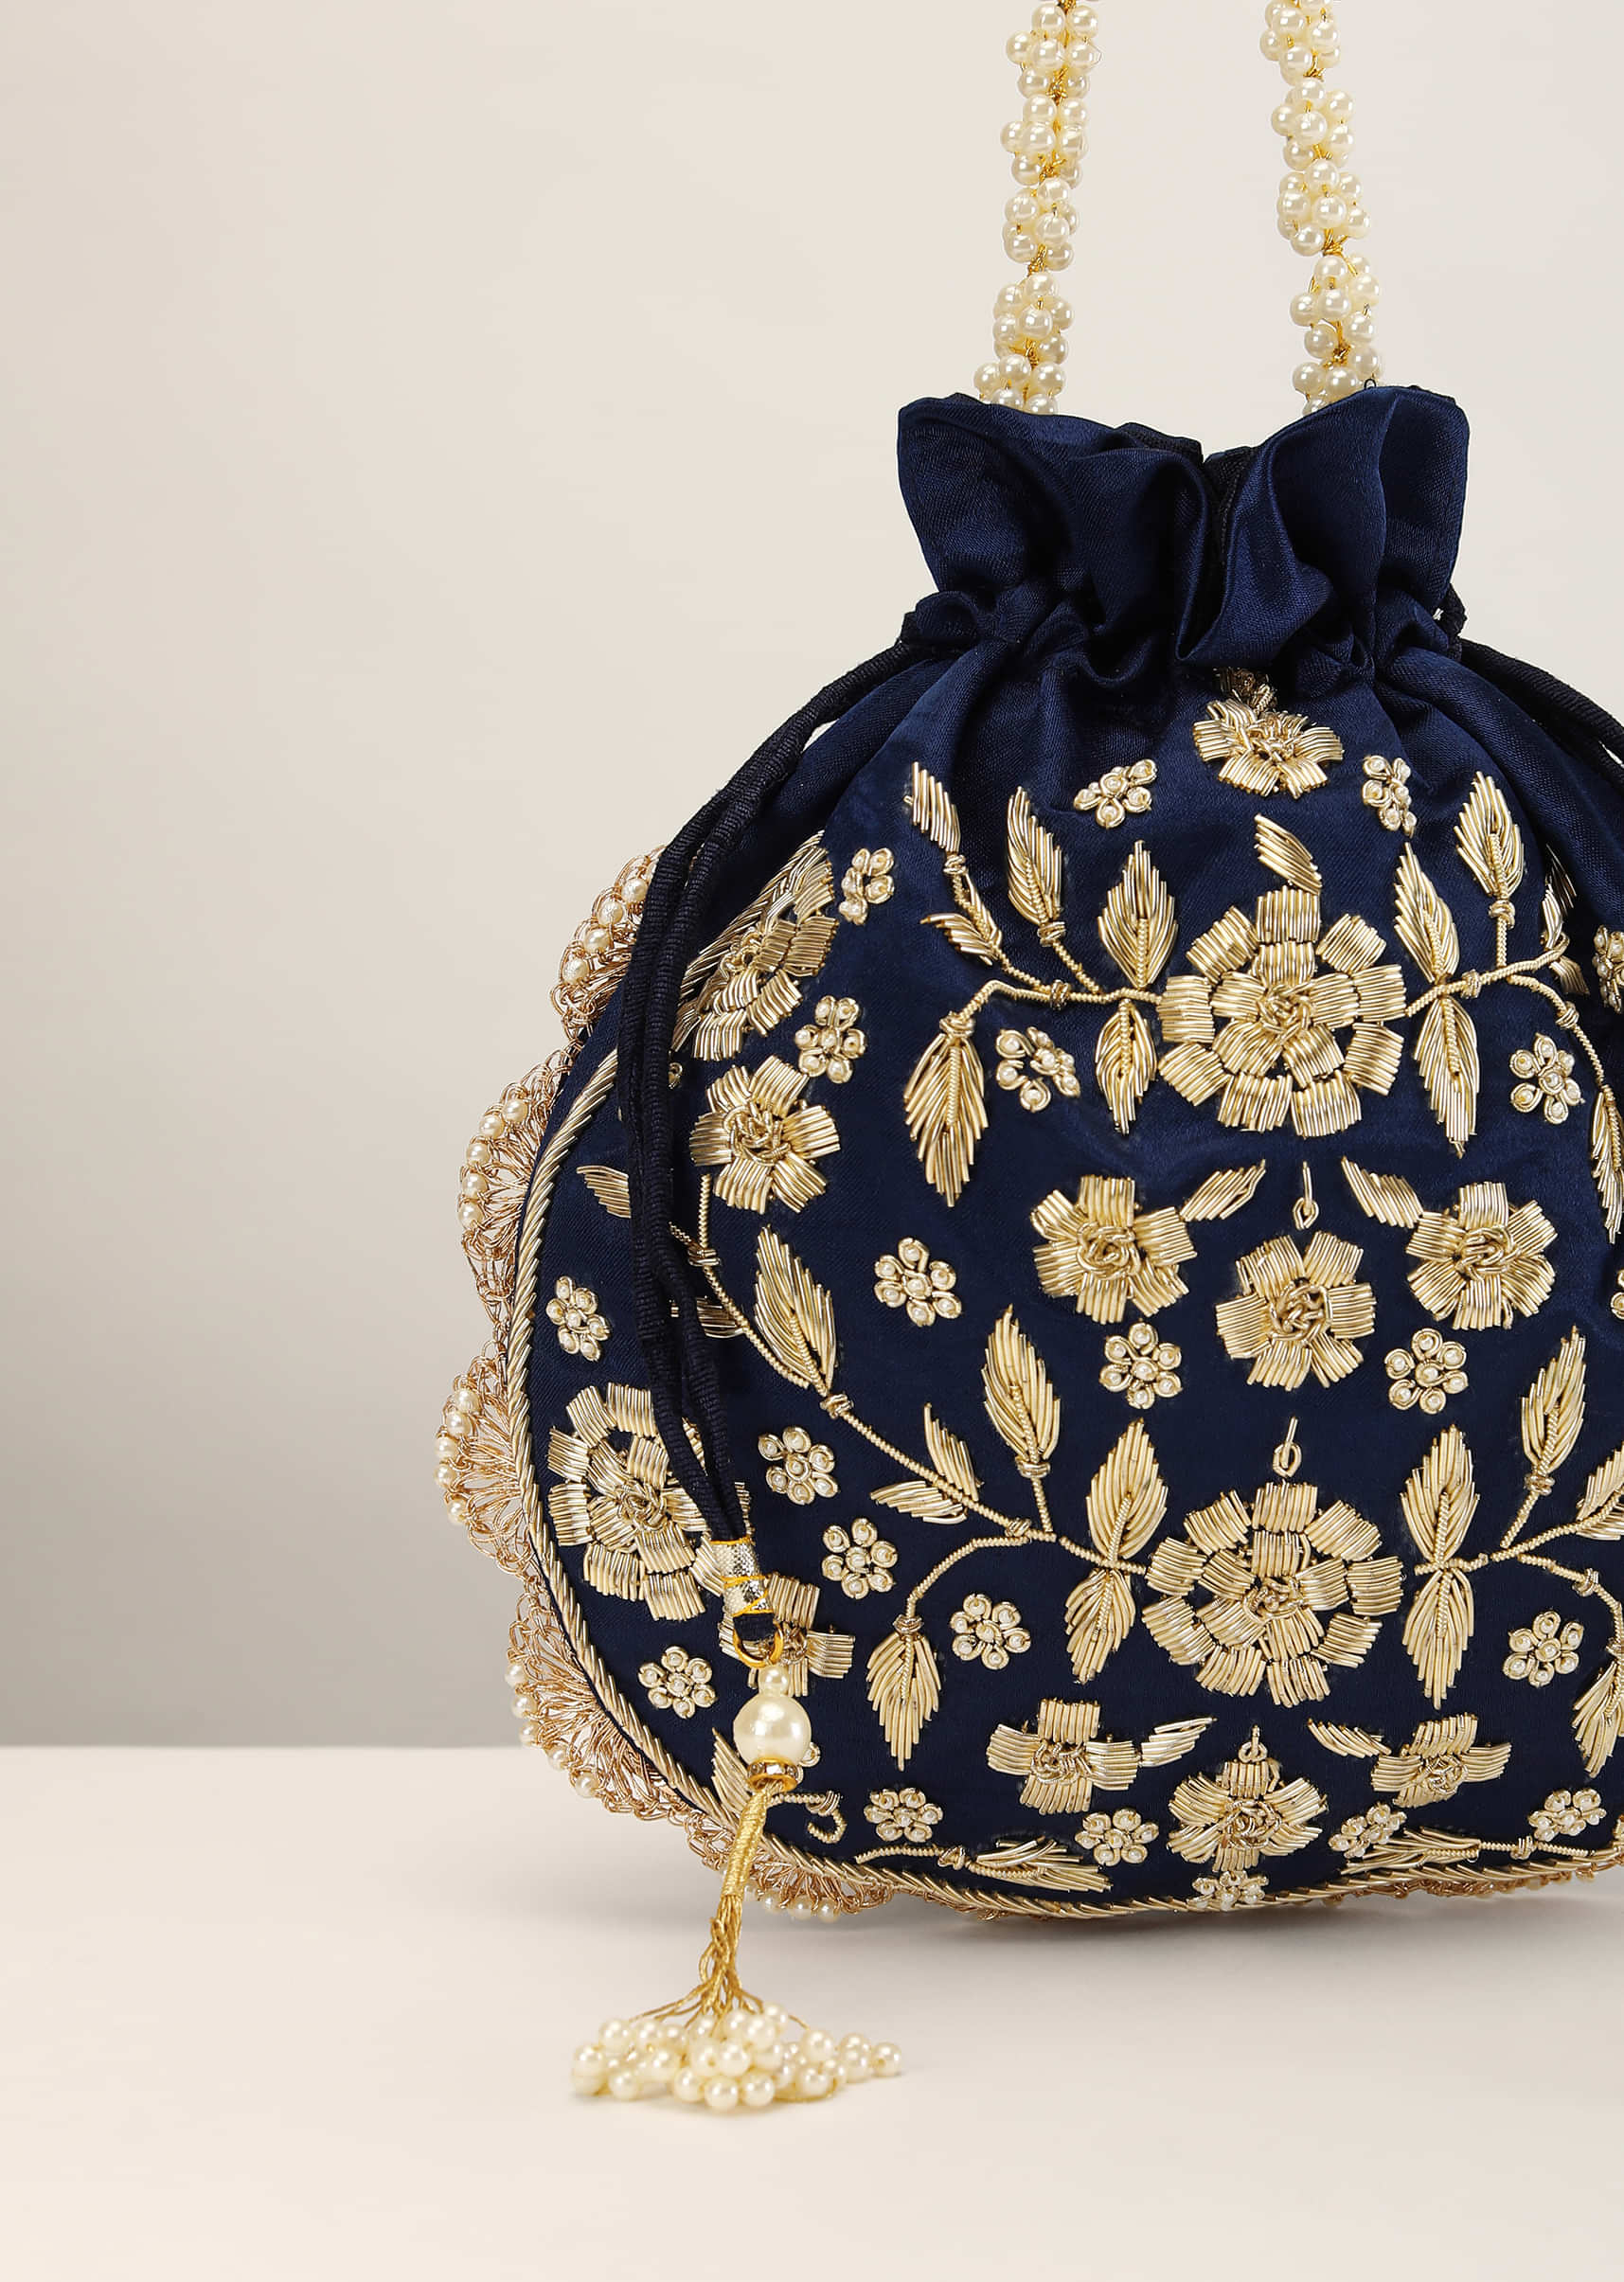 Royal Blue Potli In Satin With Hand Embroidery Detailing Using Zardosi And Moti Embroidered Floral Design